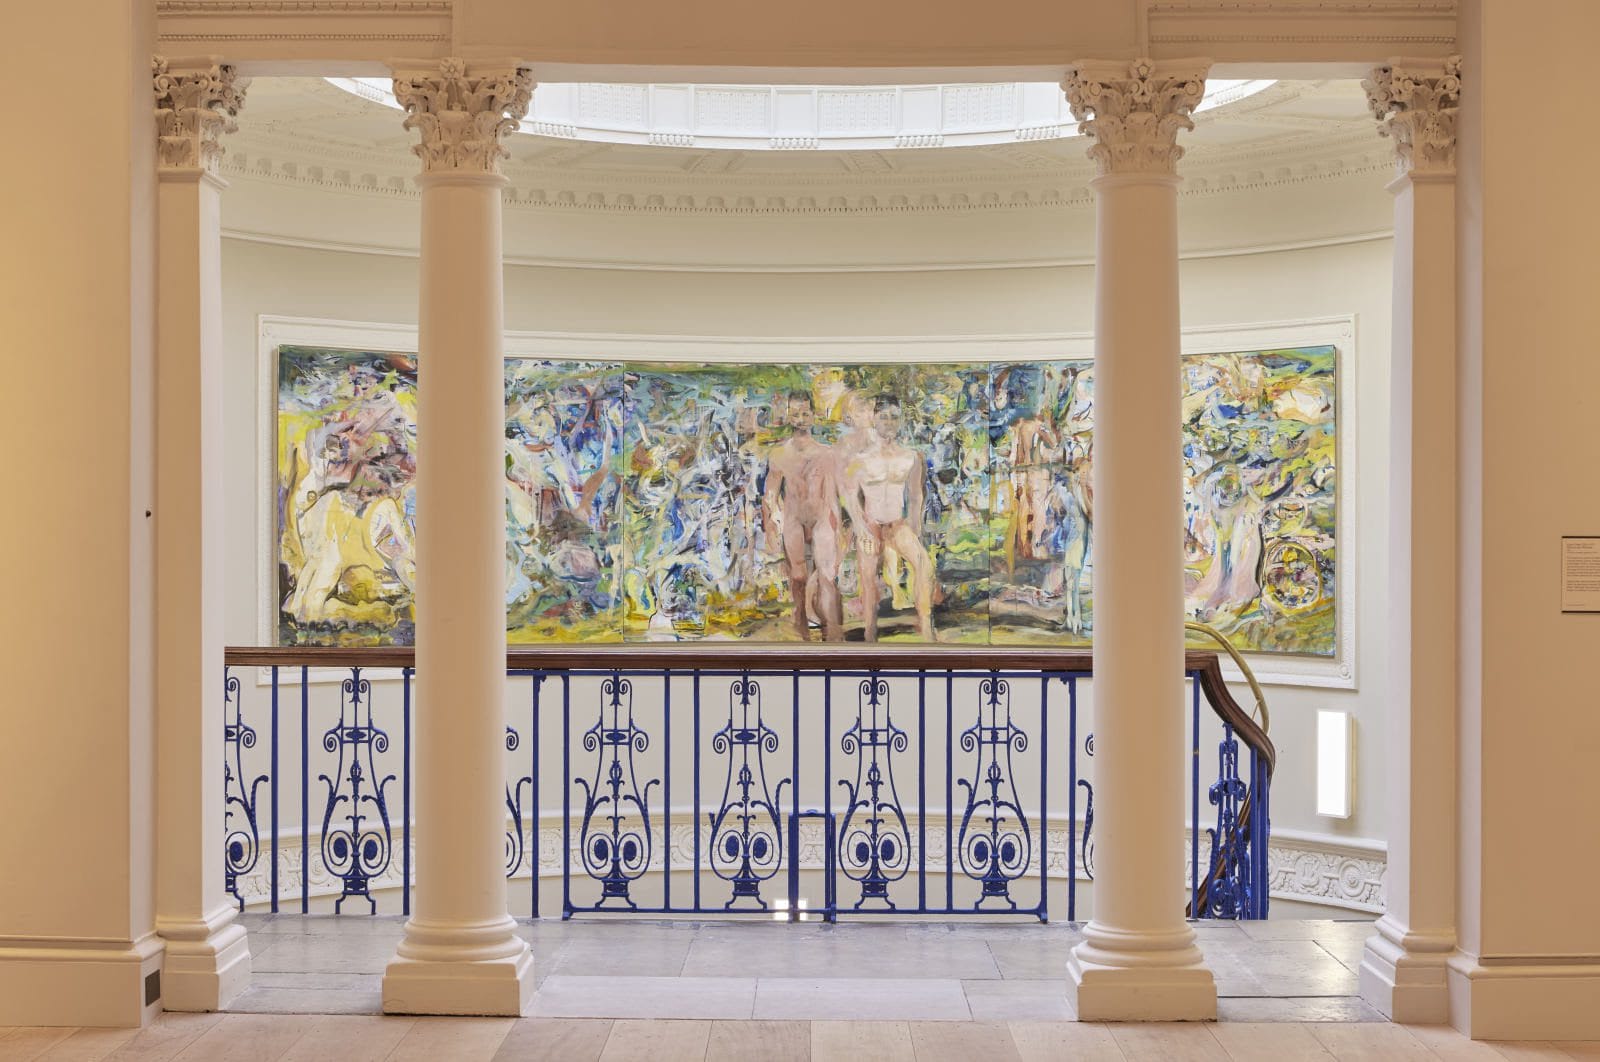 Installation view, Cecily Brown, Unmoored from her reflection, 2021 © Cecily Brown. Courtesy of The Courtauld. Photo: David Levene.